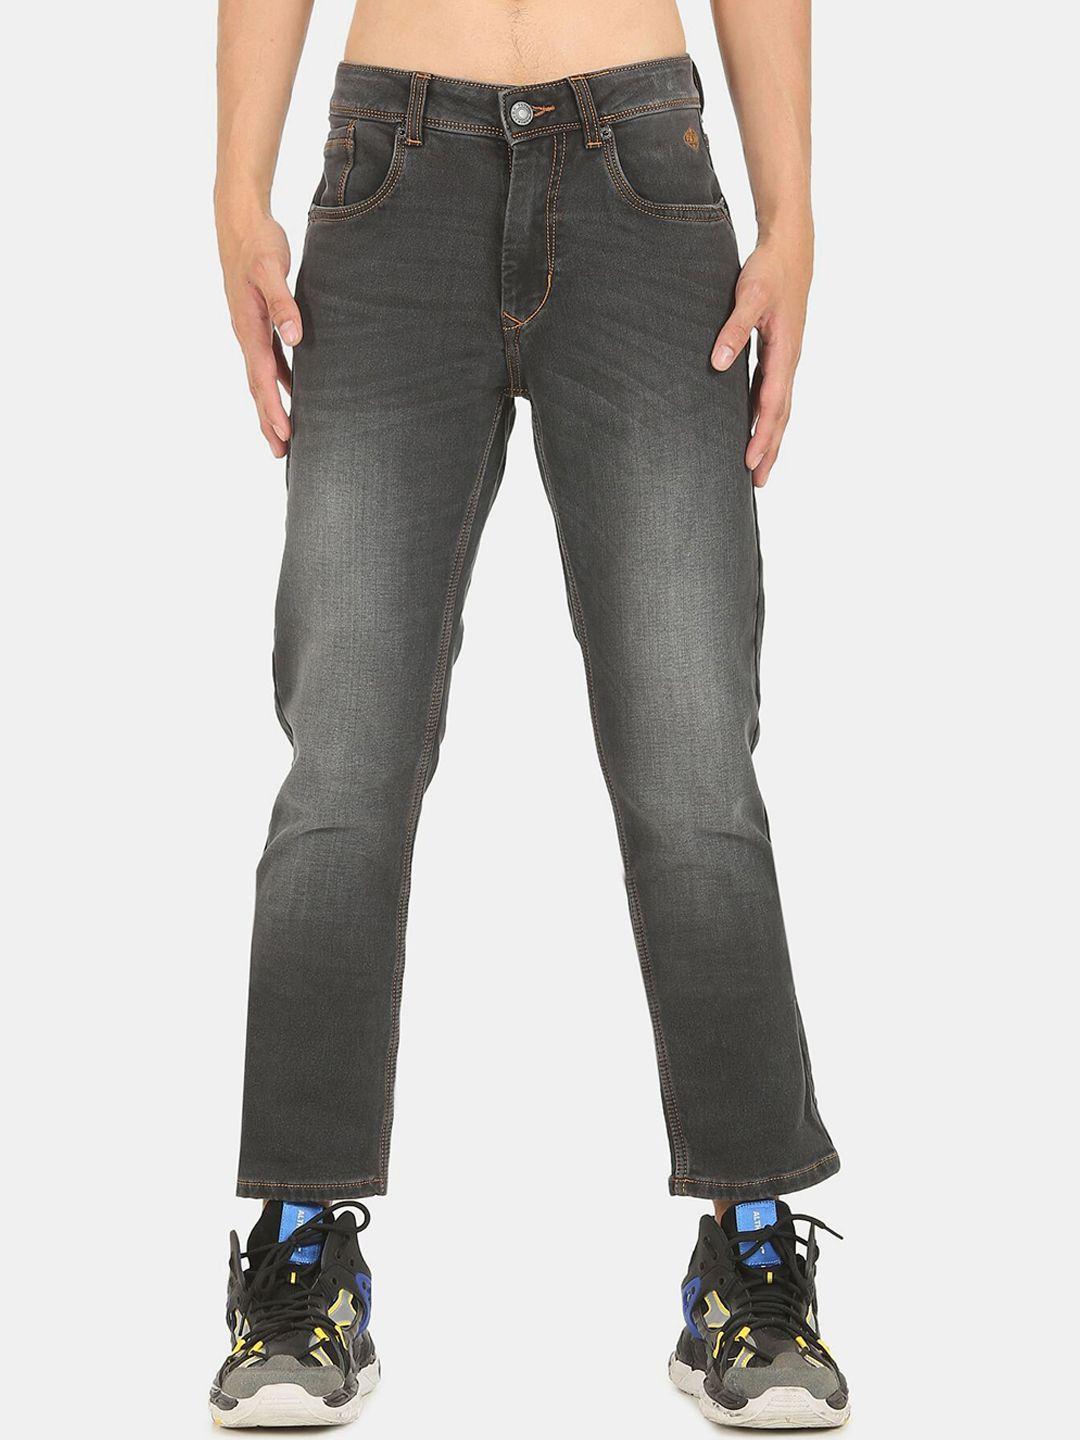 flying-machine-men-black-stretchable-tapered-fit-light-fade-jeans